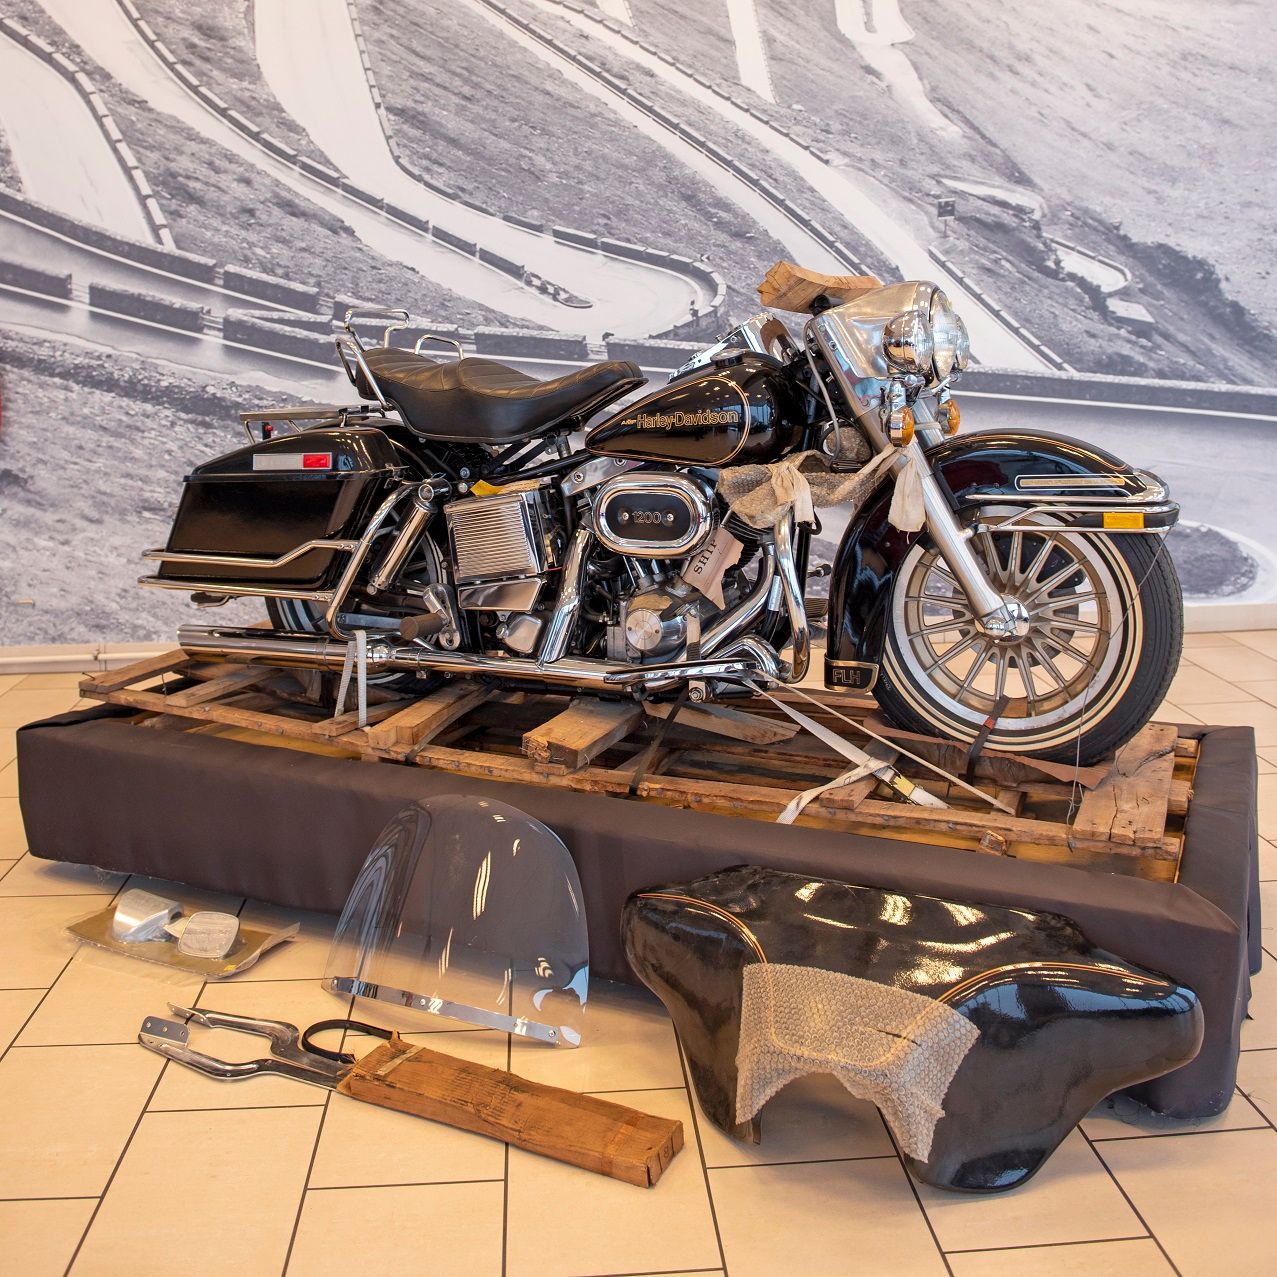 Unboxed 1978 Harley-Davidson Electra Glide_Artcurial Motorcars Auction_01